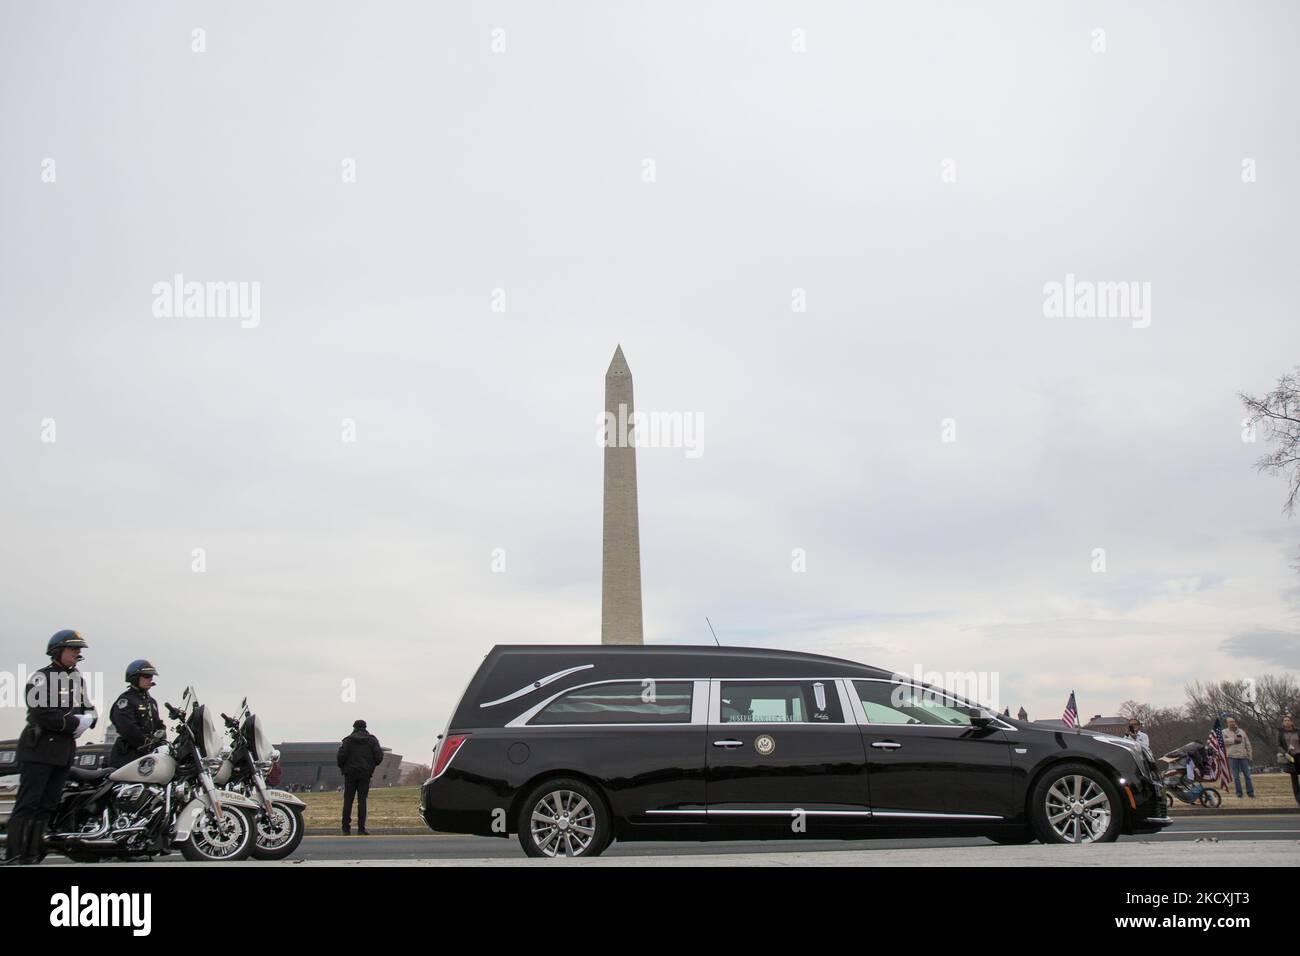 Sen. Bob Dole (R-KS) casket was transported to the memorial, from his funeral service at the U.S. National Cathedral. Dole died at age 98 on Dec. 5, 2021. Dole served in the Senate for 27 years, and in the House of Representatives for 8. Dole received a Purple Heart for his service in World War II, and was instrumental in the construction of the World War II Memorial, where the ceremony was held. (Photo by Zach Brien/NurPhoto) Stock Photo